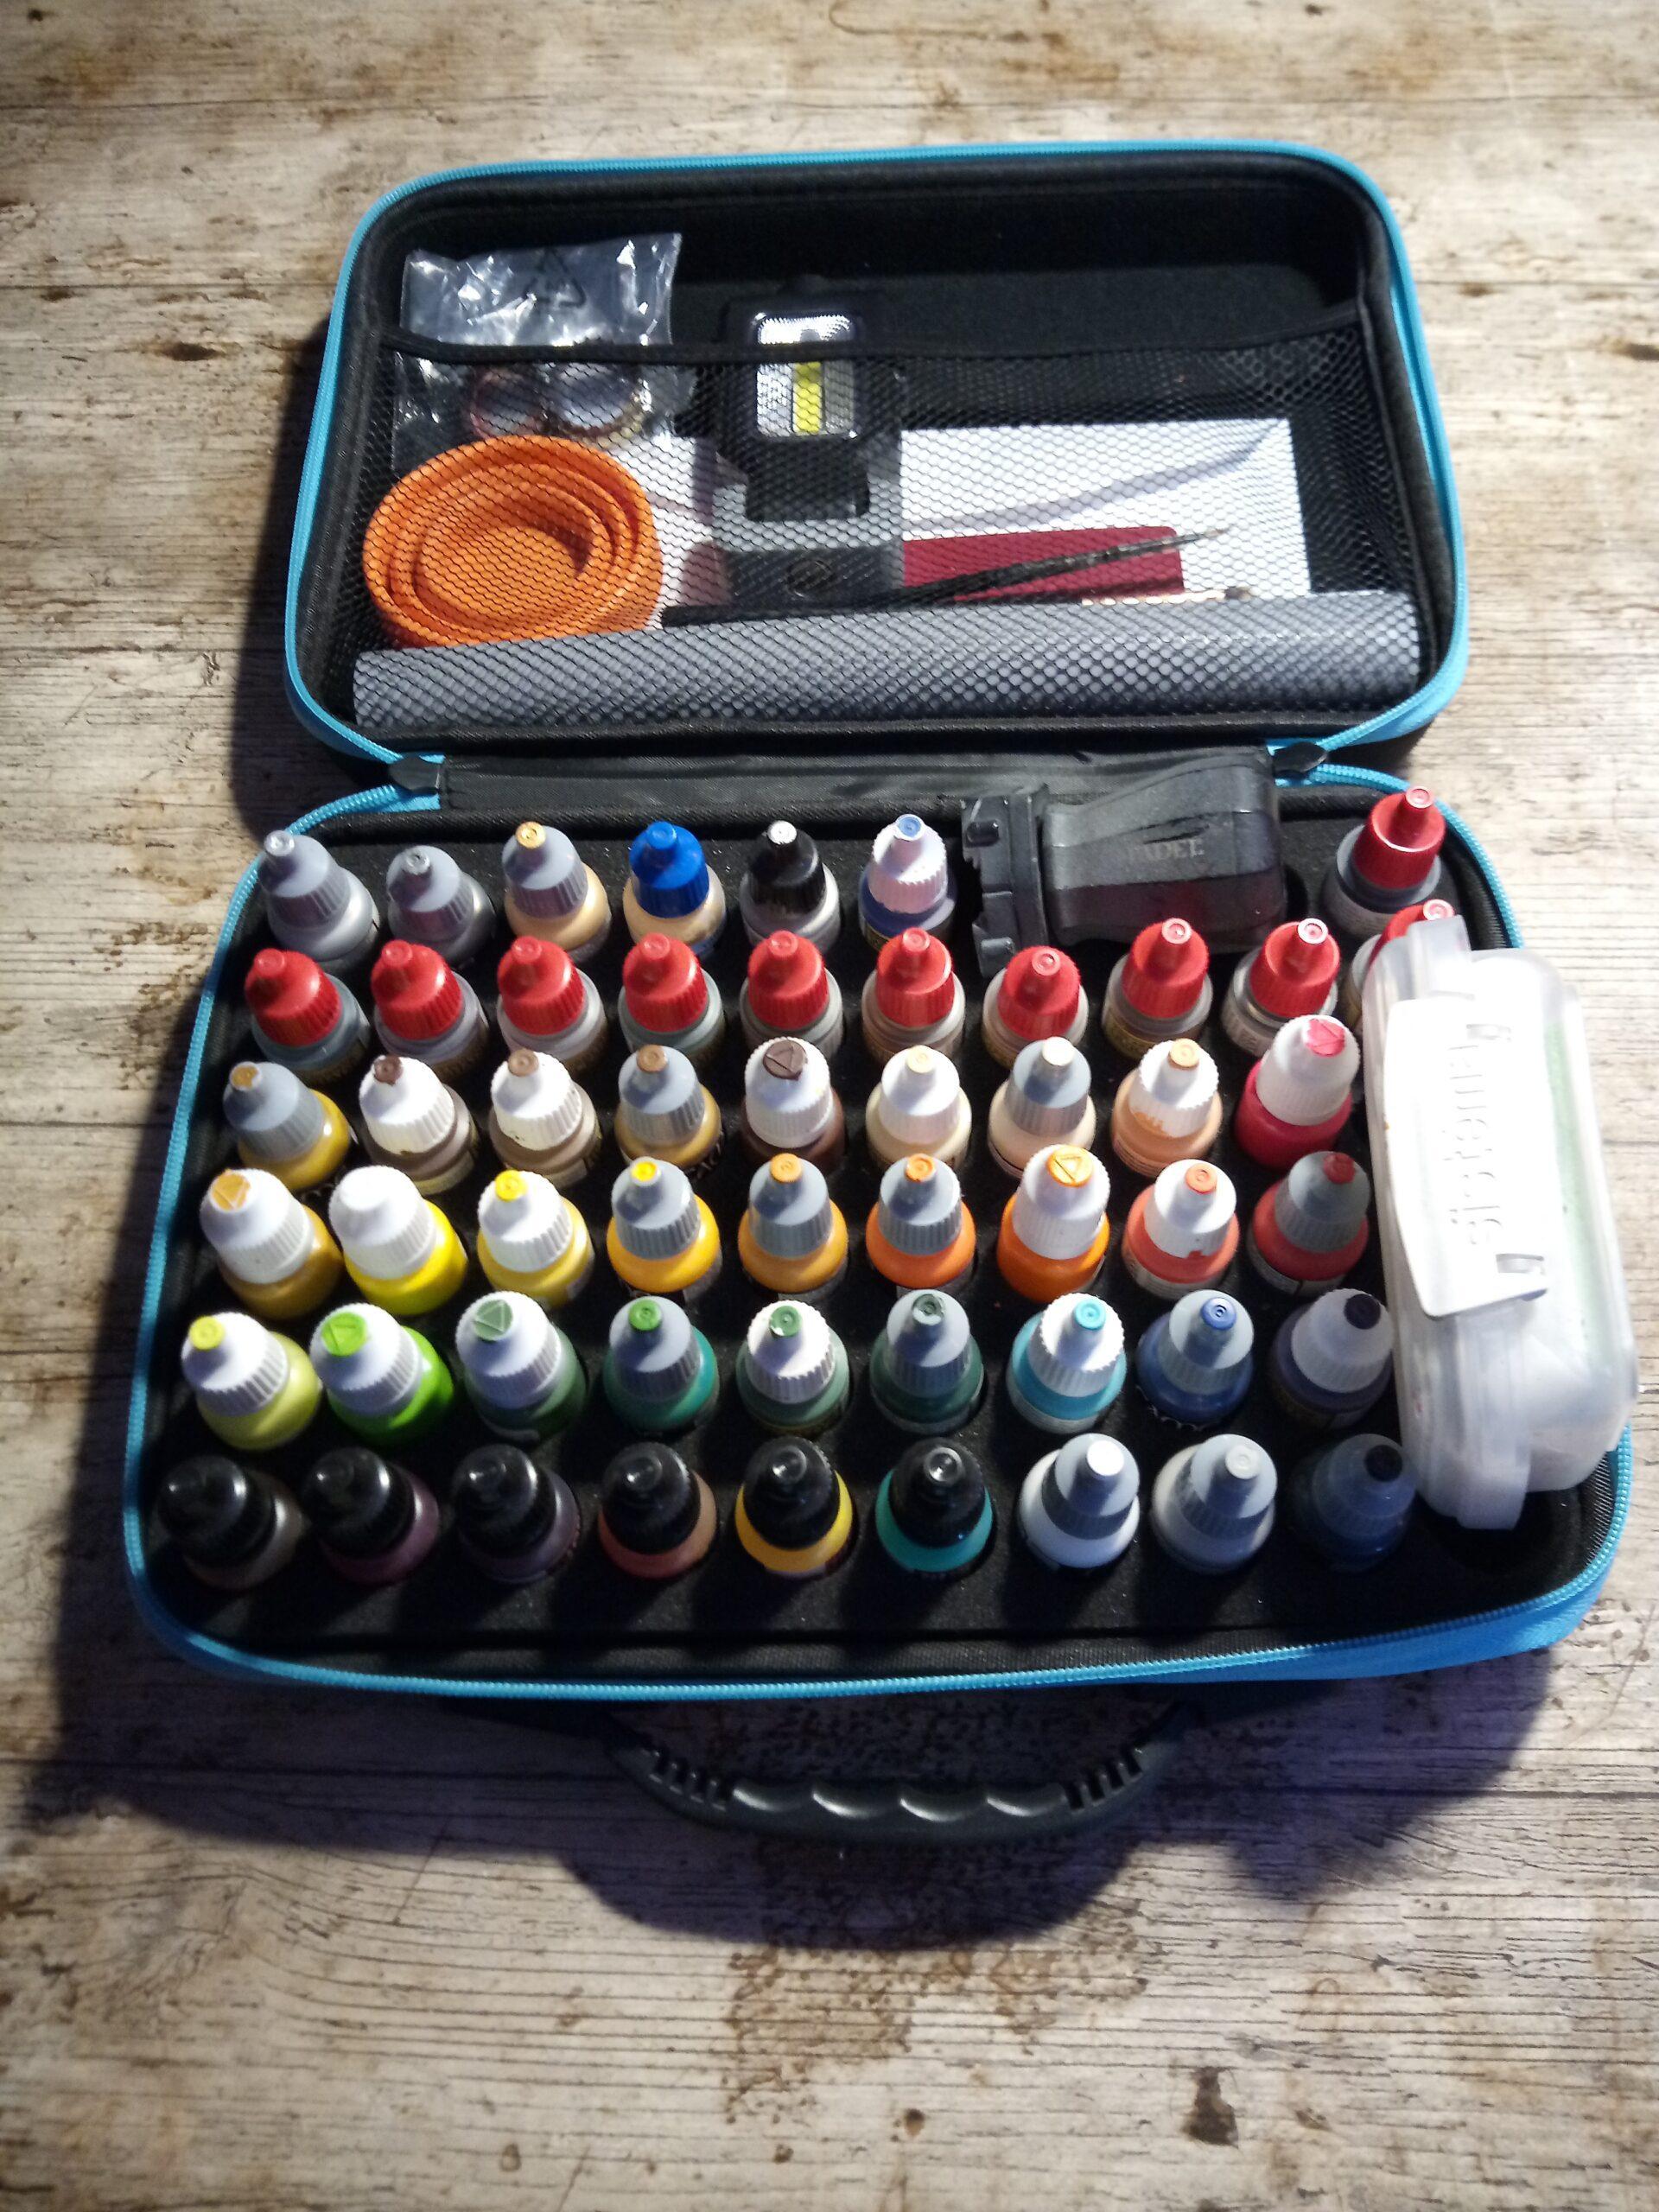 Contents of my portable paint kit.